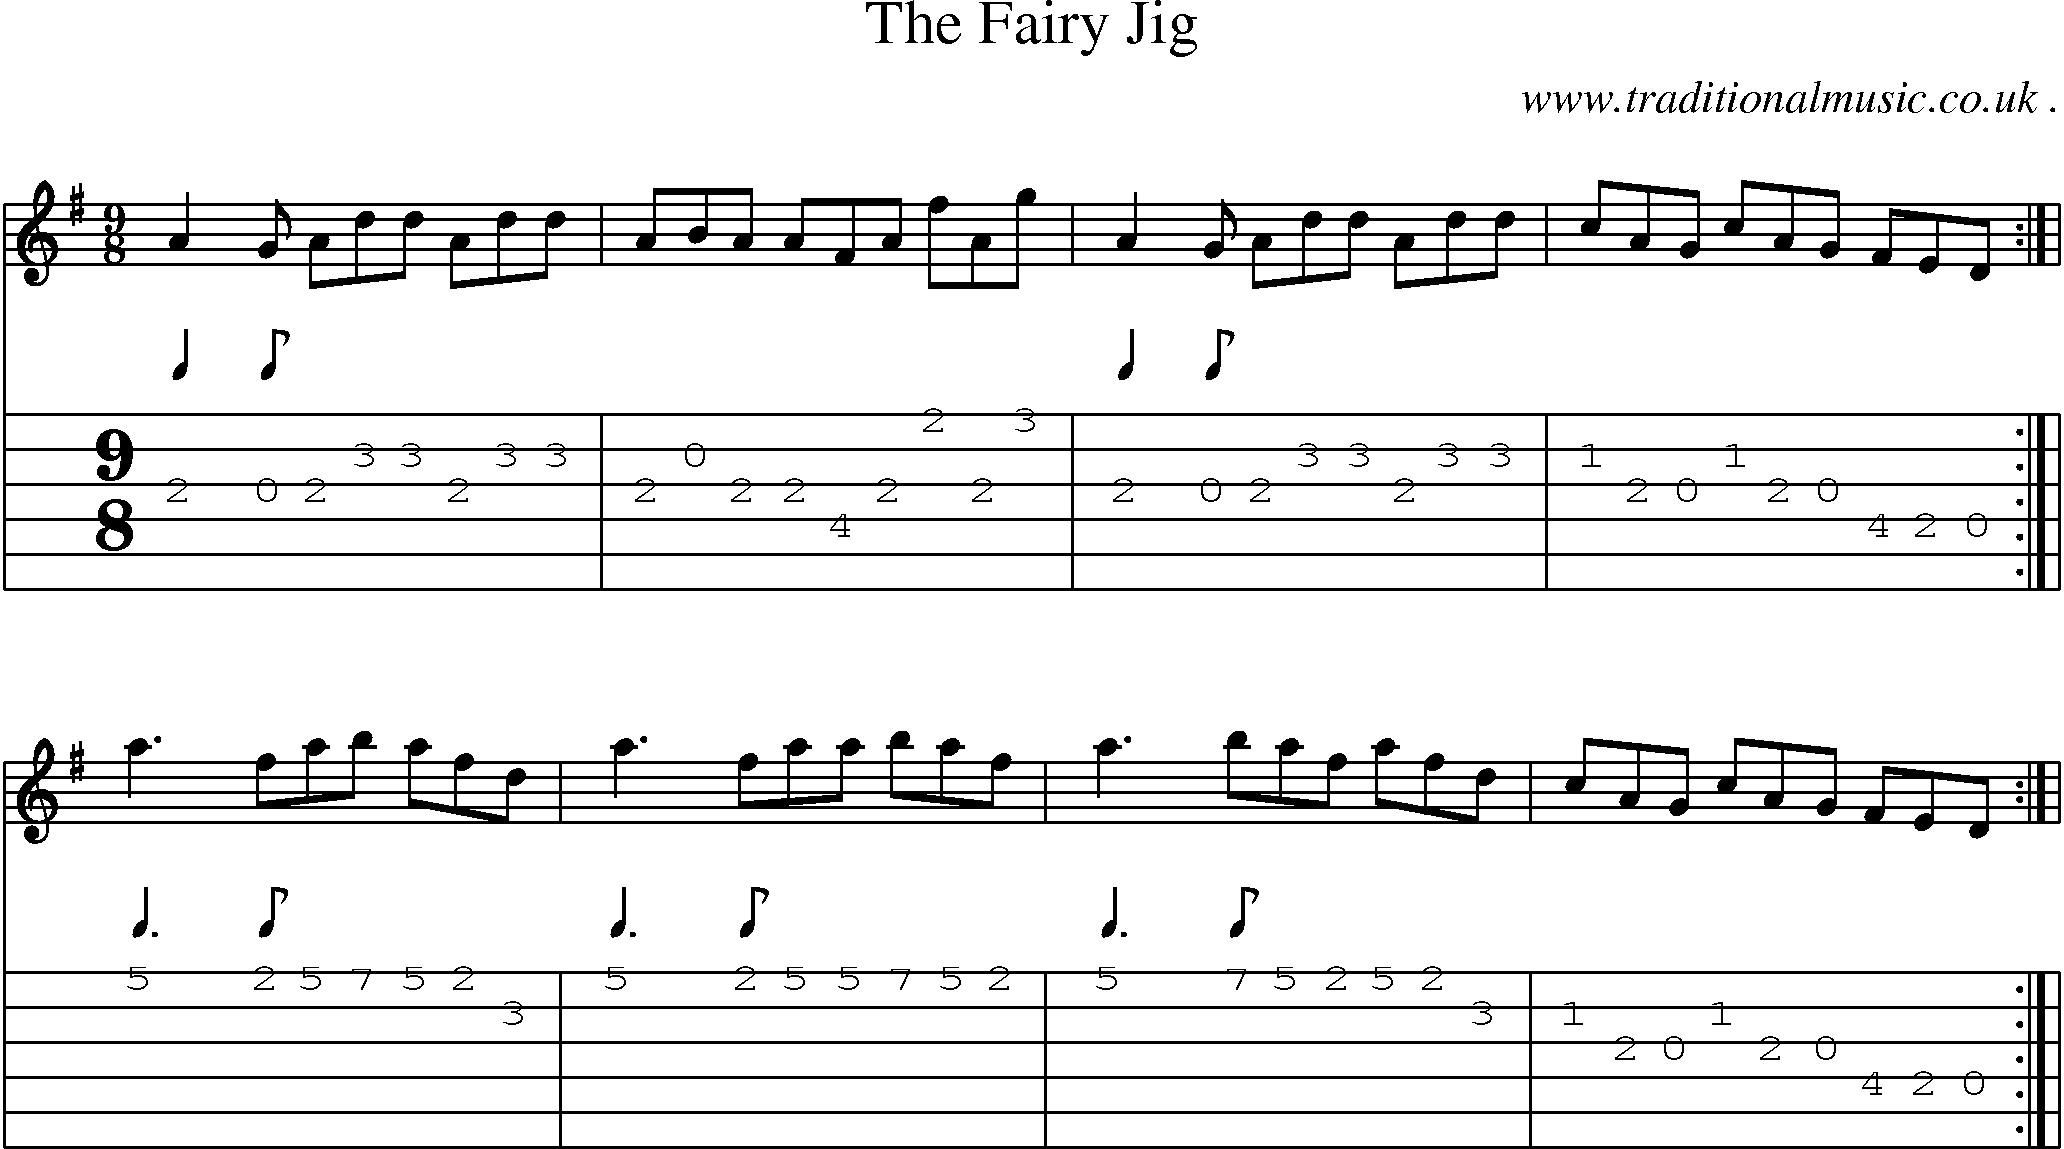 Sheet-Music and Guitar Tabs for The Fairy Jig